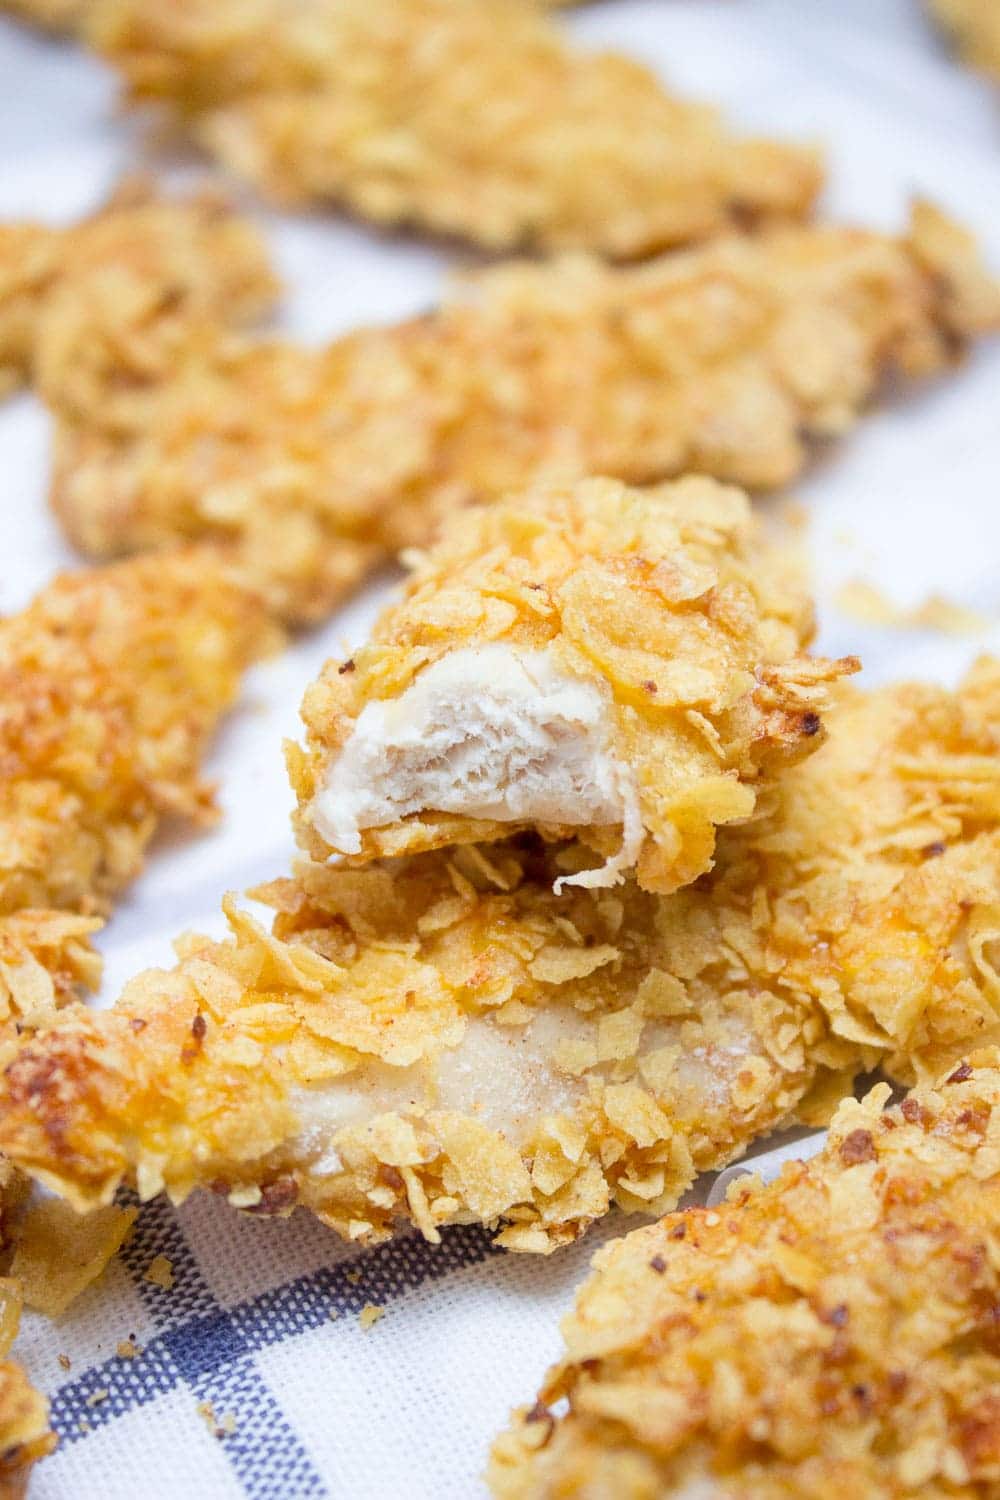 Crispy Baked Cornflake Chicken Tenders made without added fat are the perfect low-calorie, quick and HEALTHY family meal. Served with homemade Honey Dijon Sauce, these tenders are delicious gameday finger food too. CLICK to read more or PIN for later! 